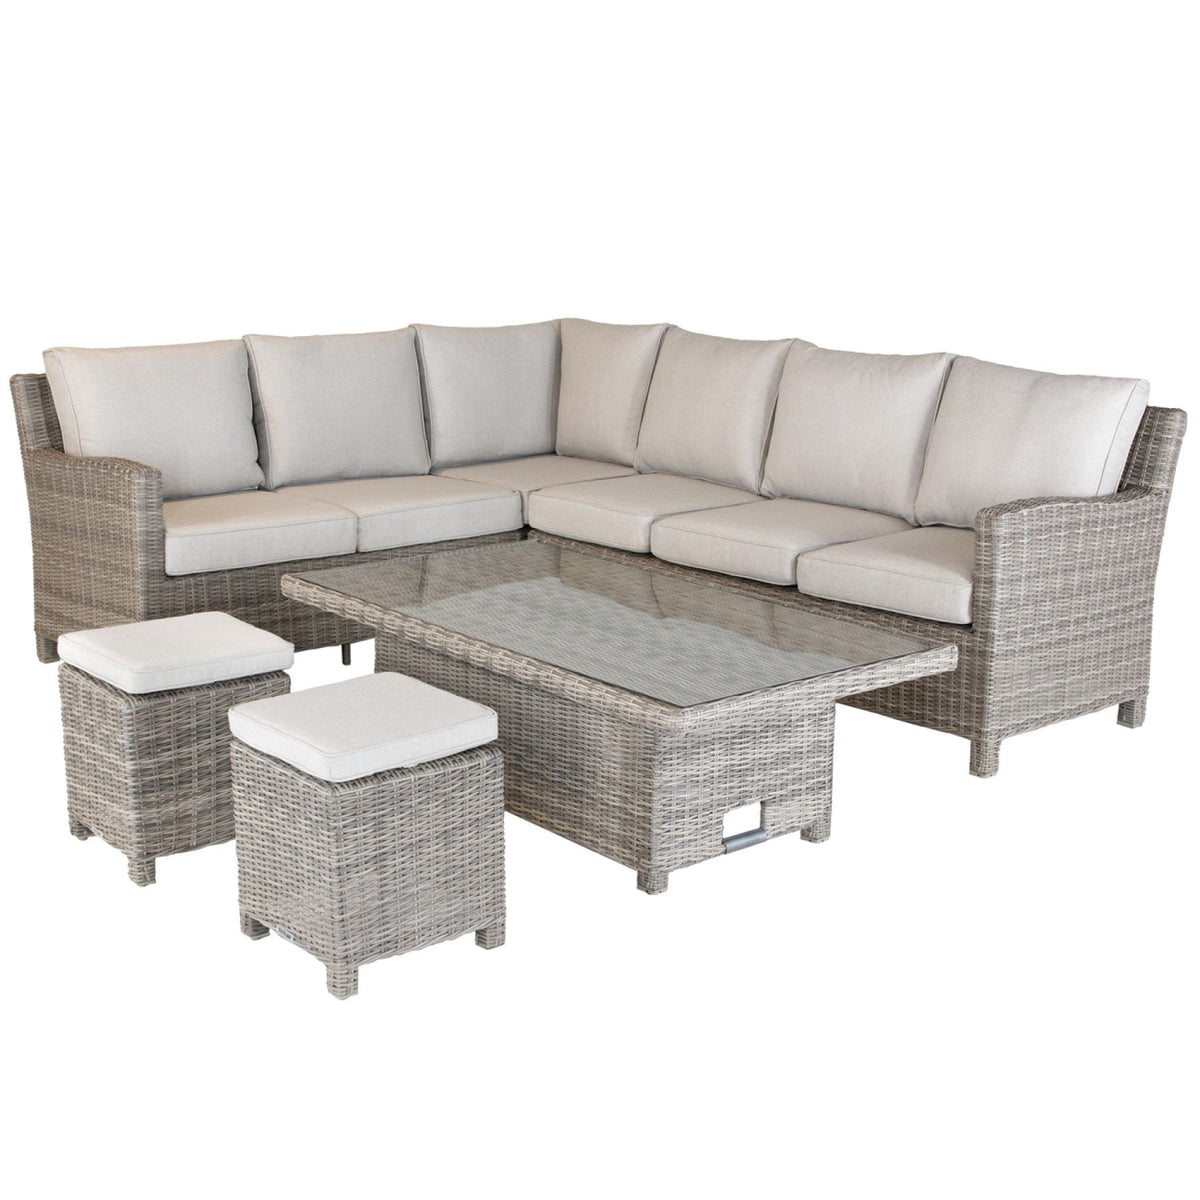 Kettler Palma Signature Corner Right Hand Oyster Sofa Set with High Low Glass Top Table